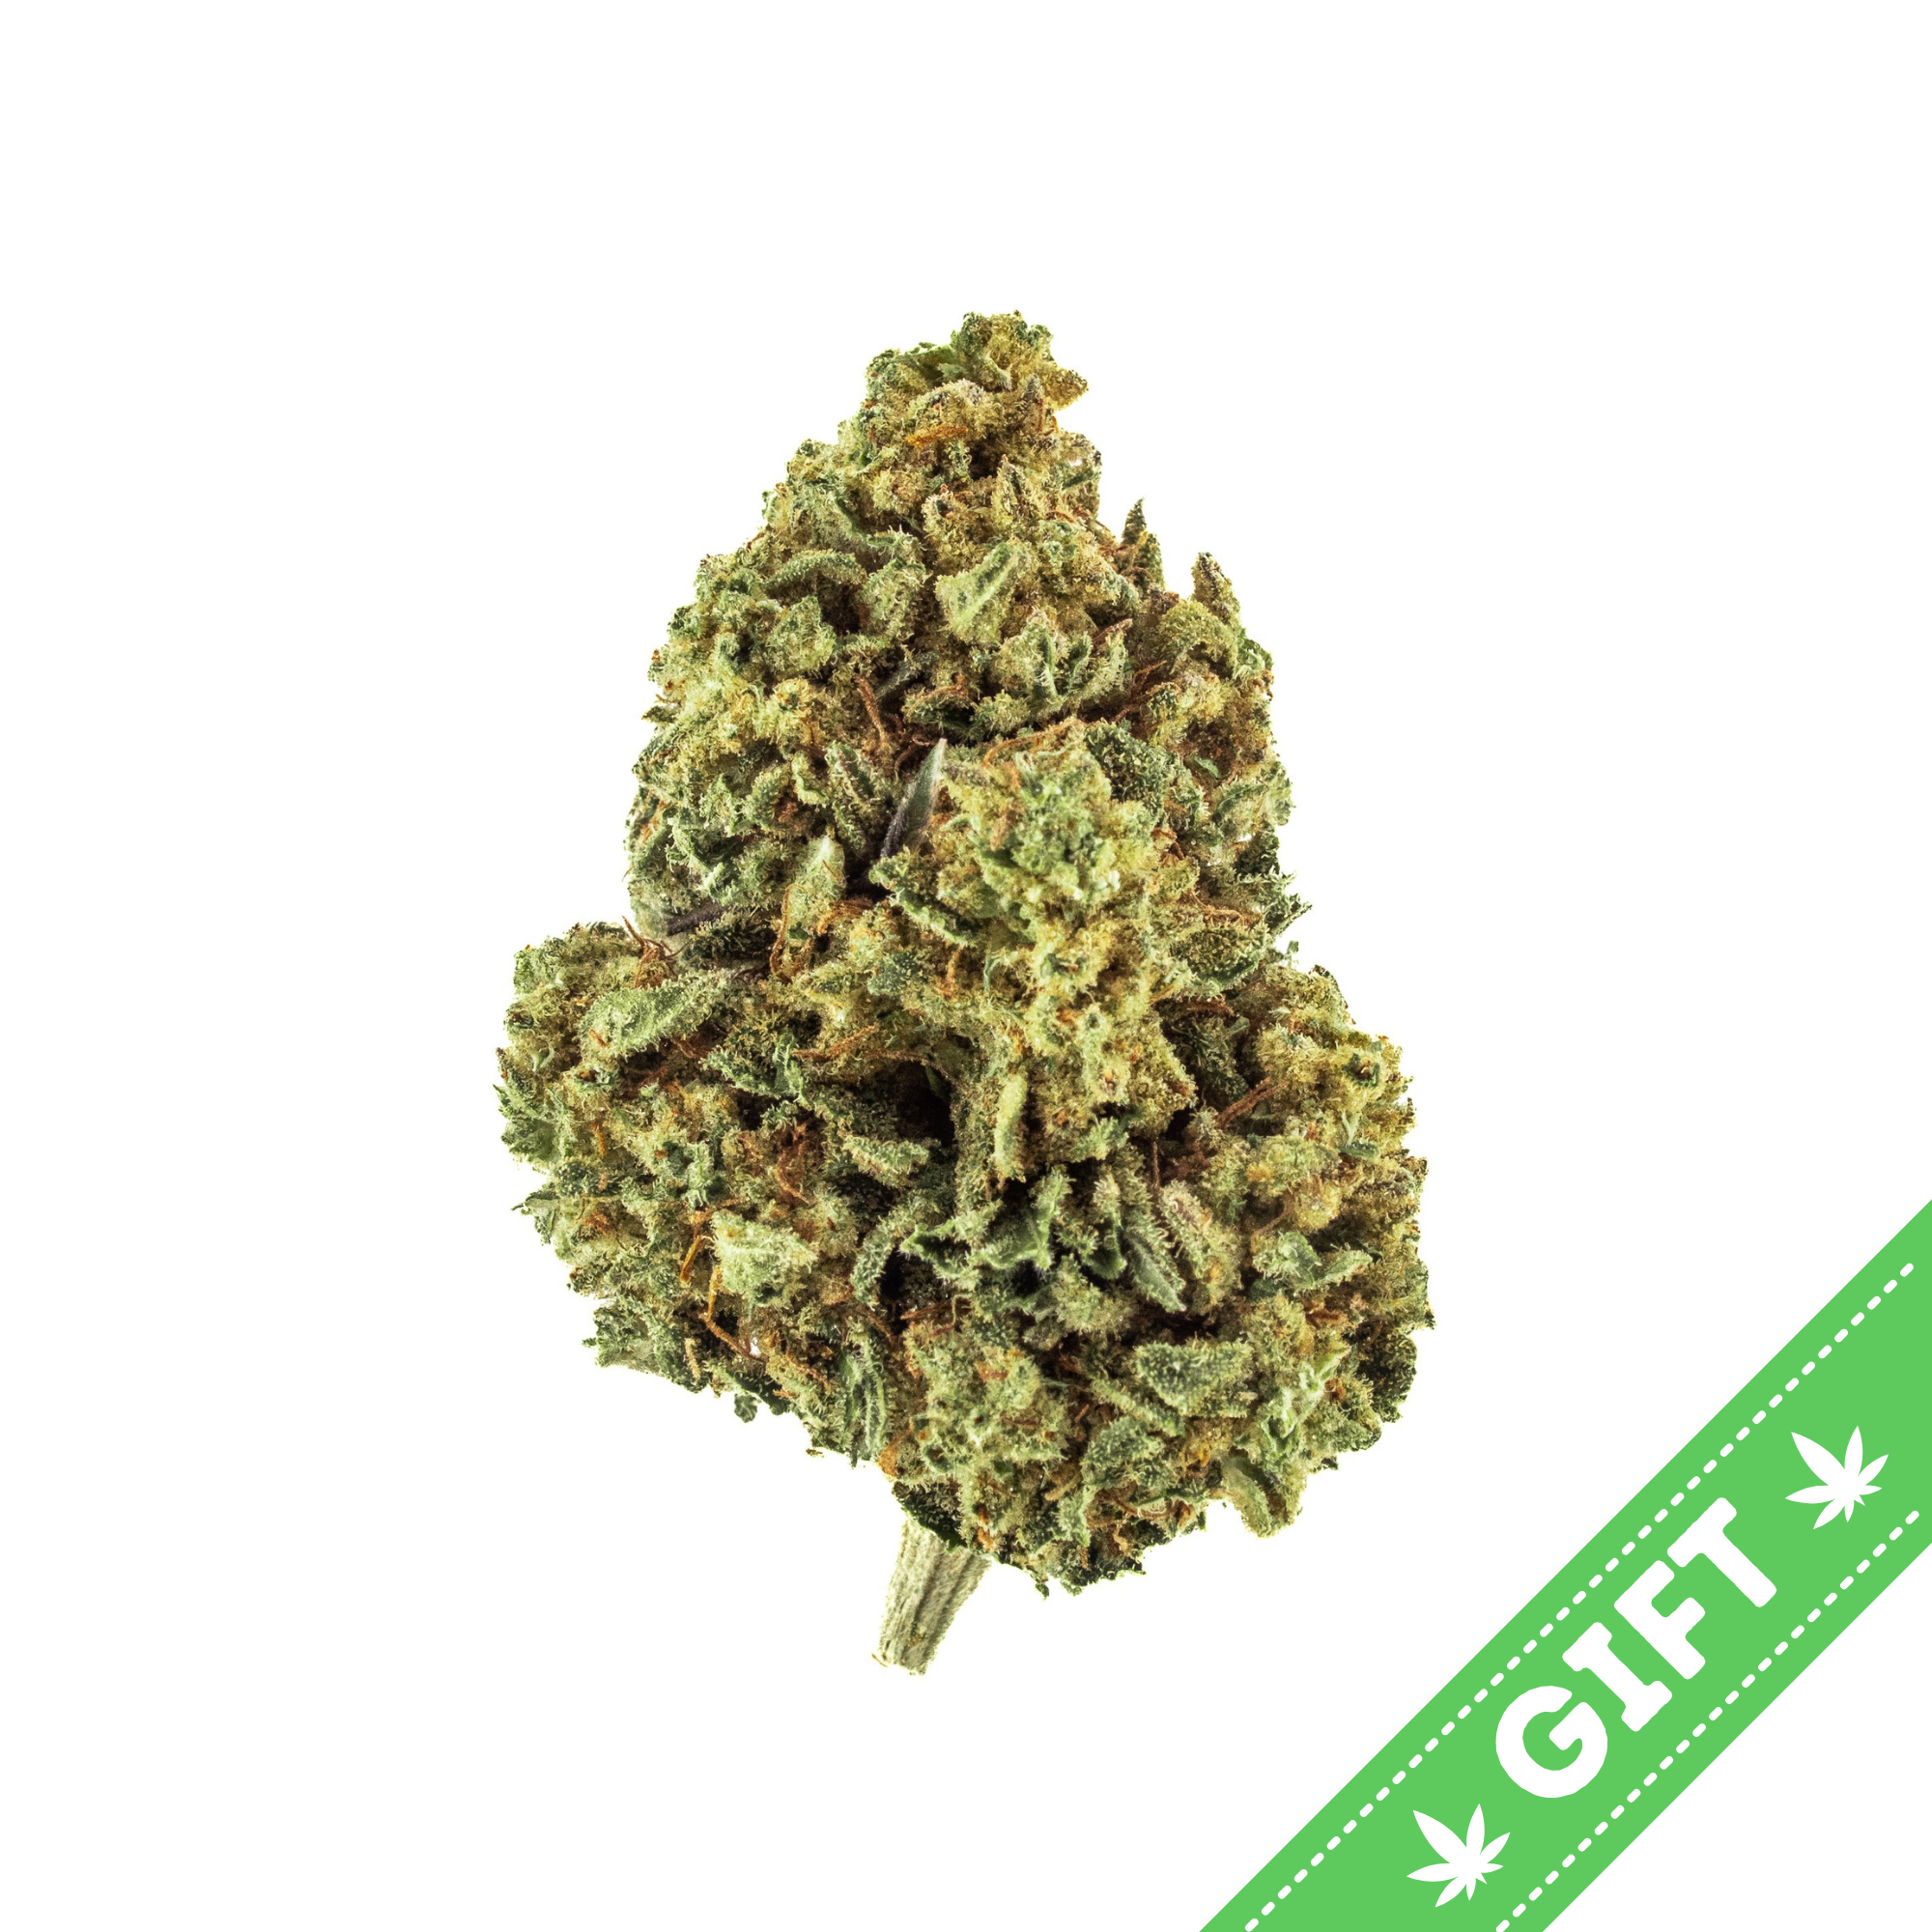 Giving Tree gifts Blue Dream, a balanced sativa dominant hybrid, with a smooth and spicy taste and notes of blueberry and haze.